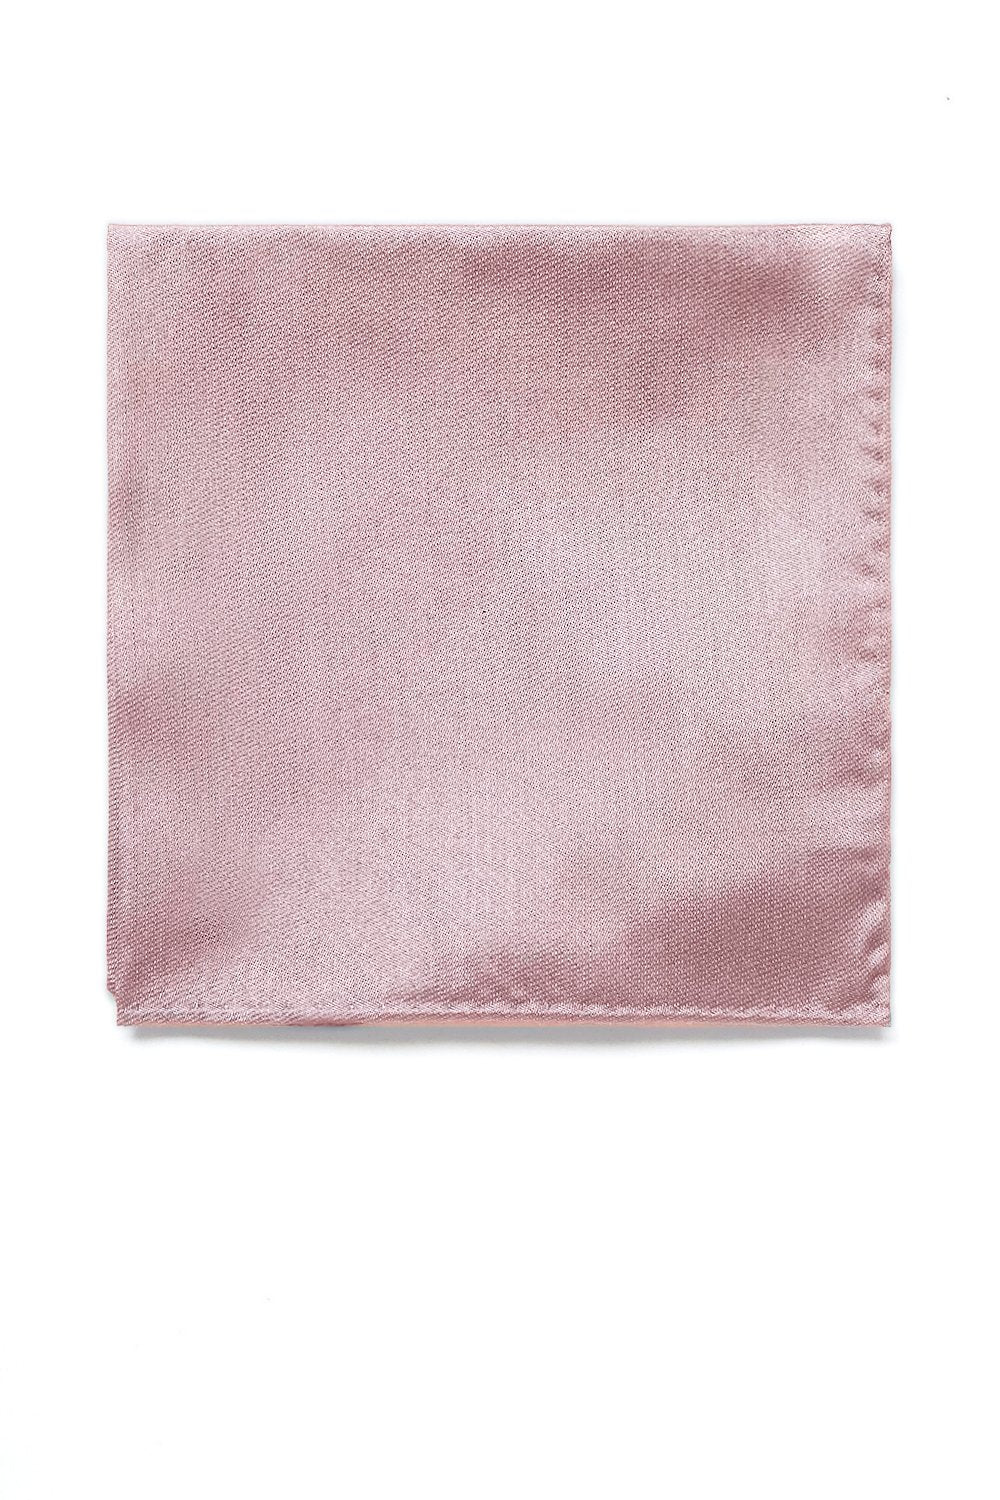 Didi Pocket Square in dark mauve by Birdy Grey, front view